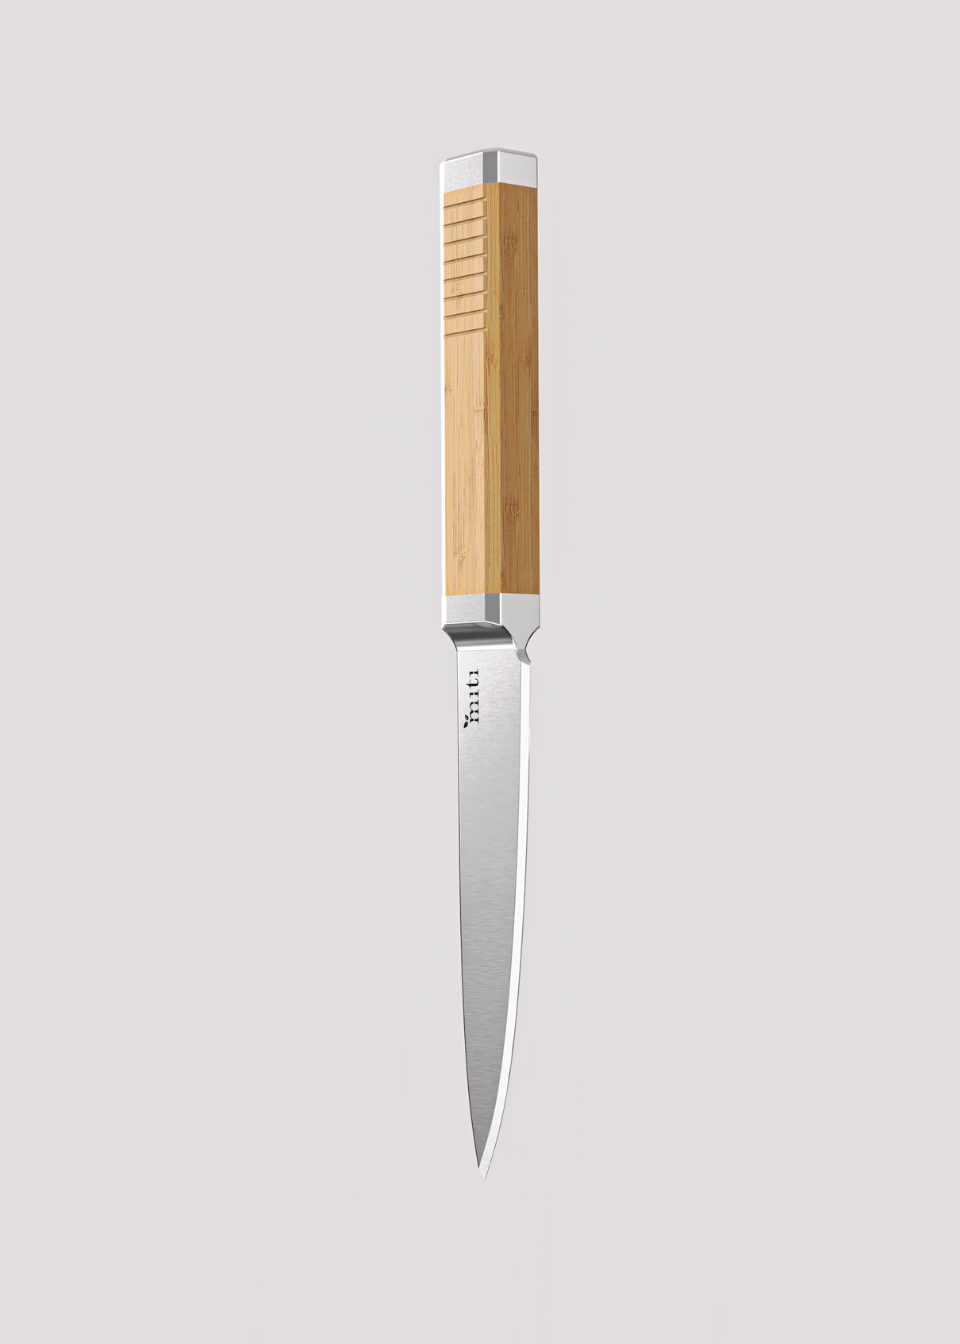 Modern bamboo knife small in white back ground